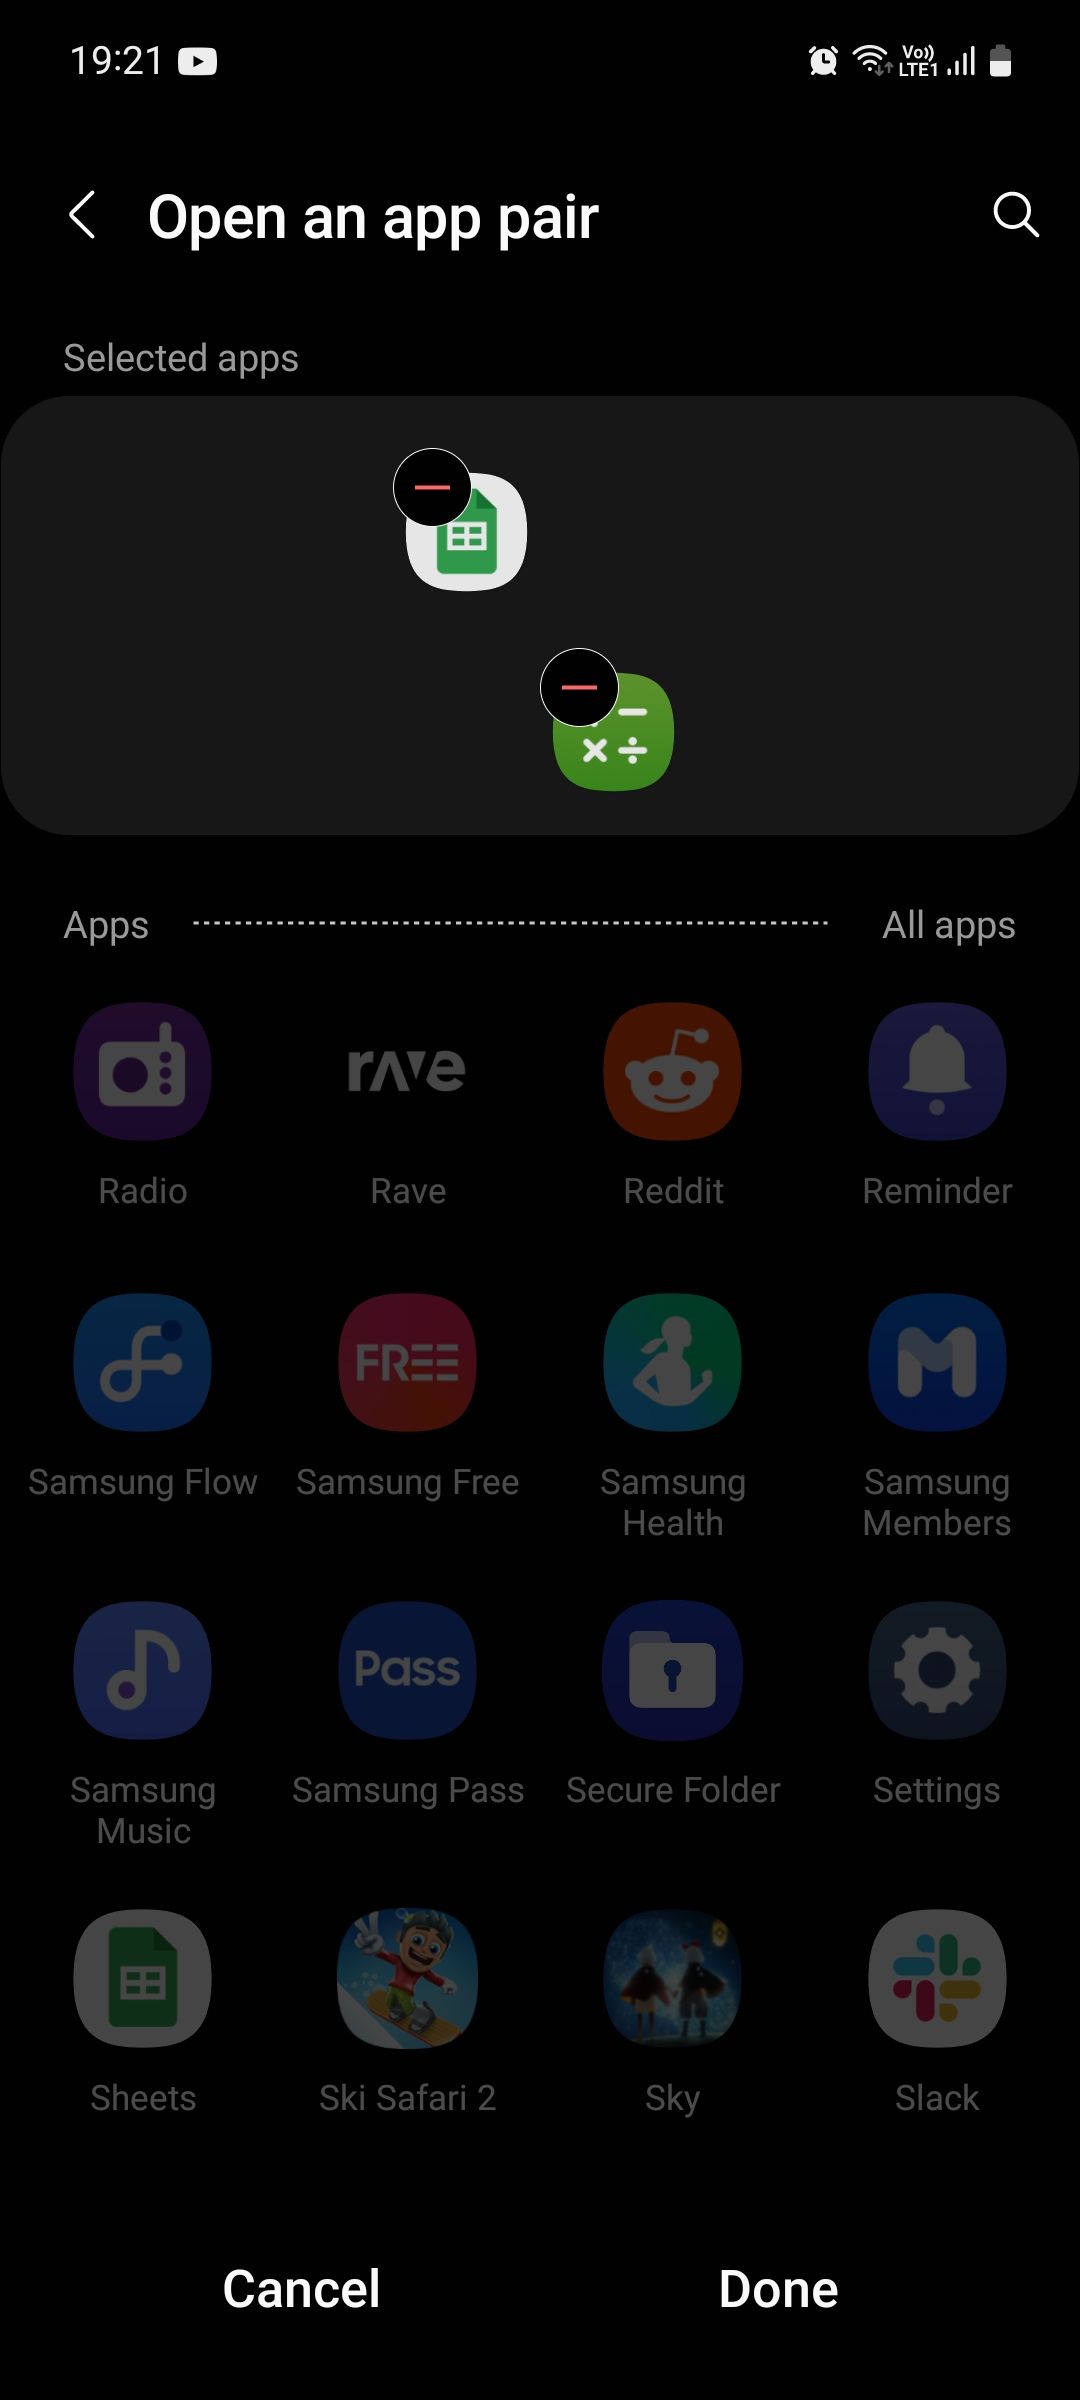 Samsung Modes and Routines Open an app pair